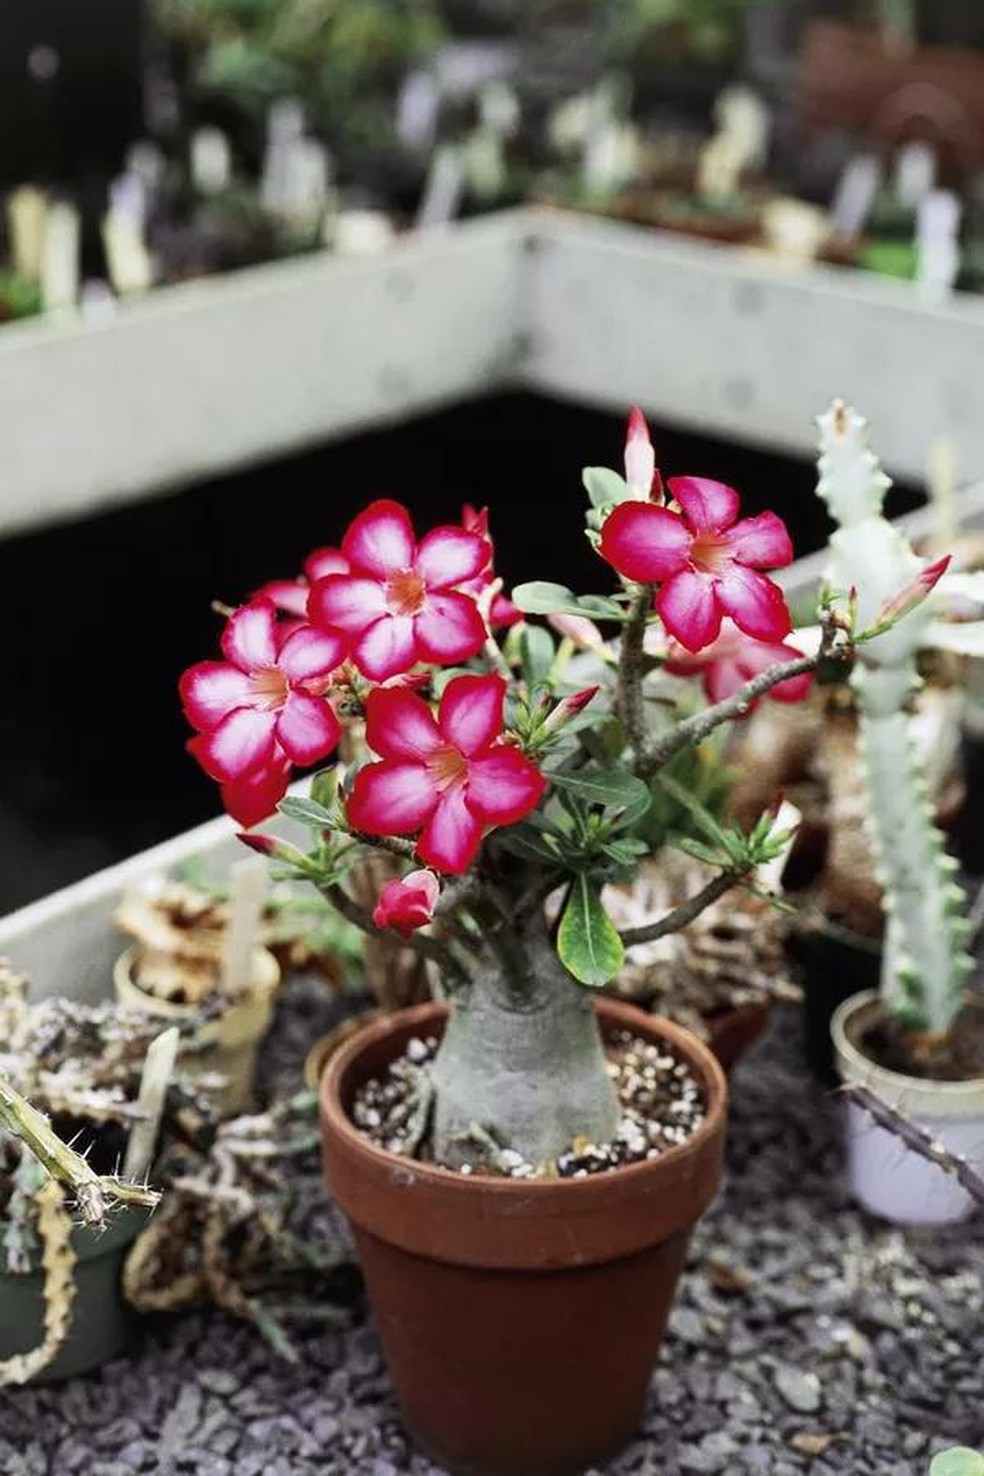 UNSPECIFIED - JANUARY 27: Desert rose (Adenium obesum), Apocynaceae. (Photo by DeAgostini/Getty Images) (Foto: De Agostini via Getty Images) — Foto: Casa Vogue